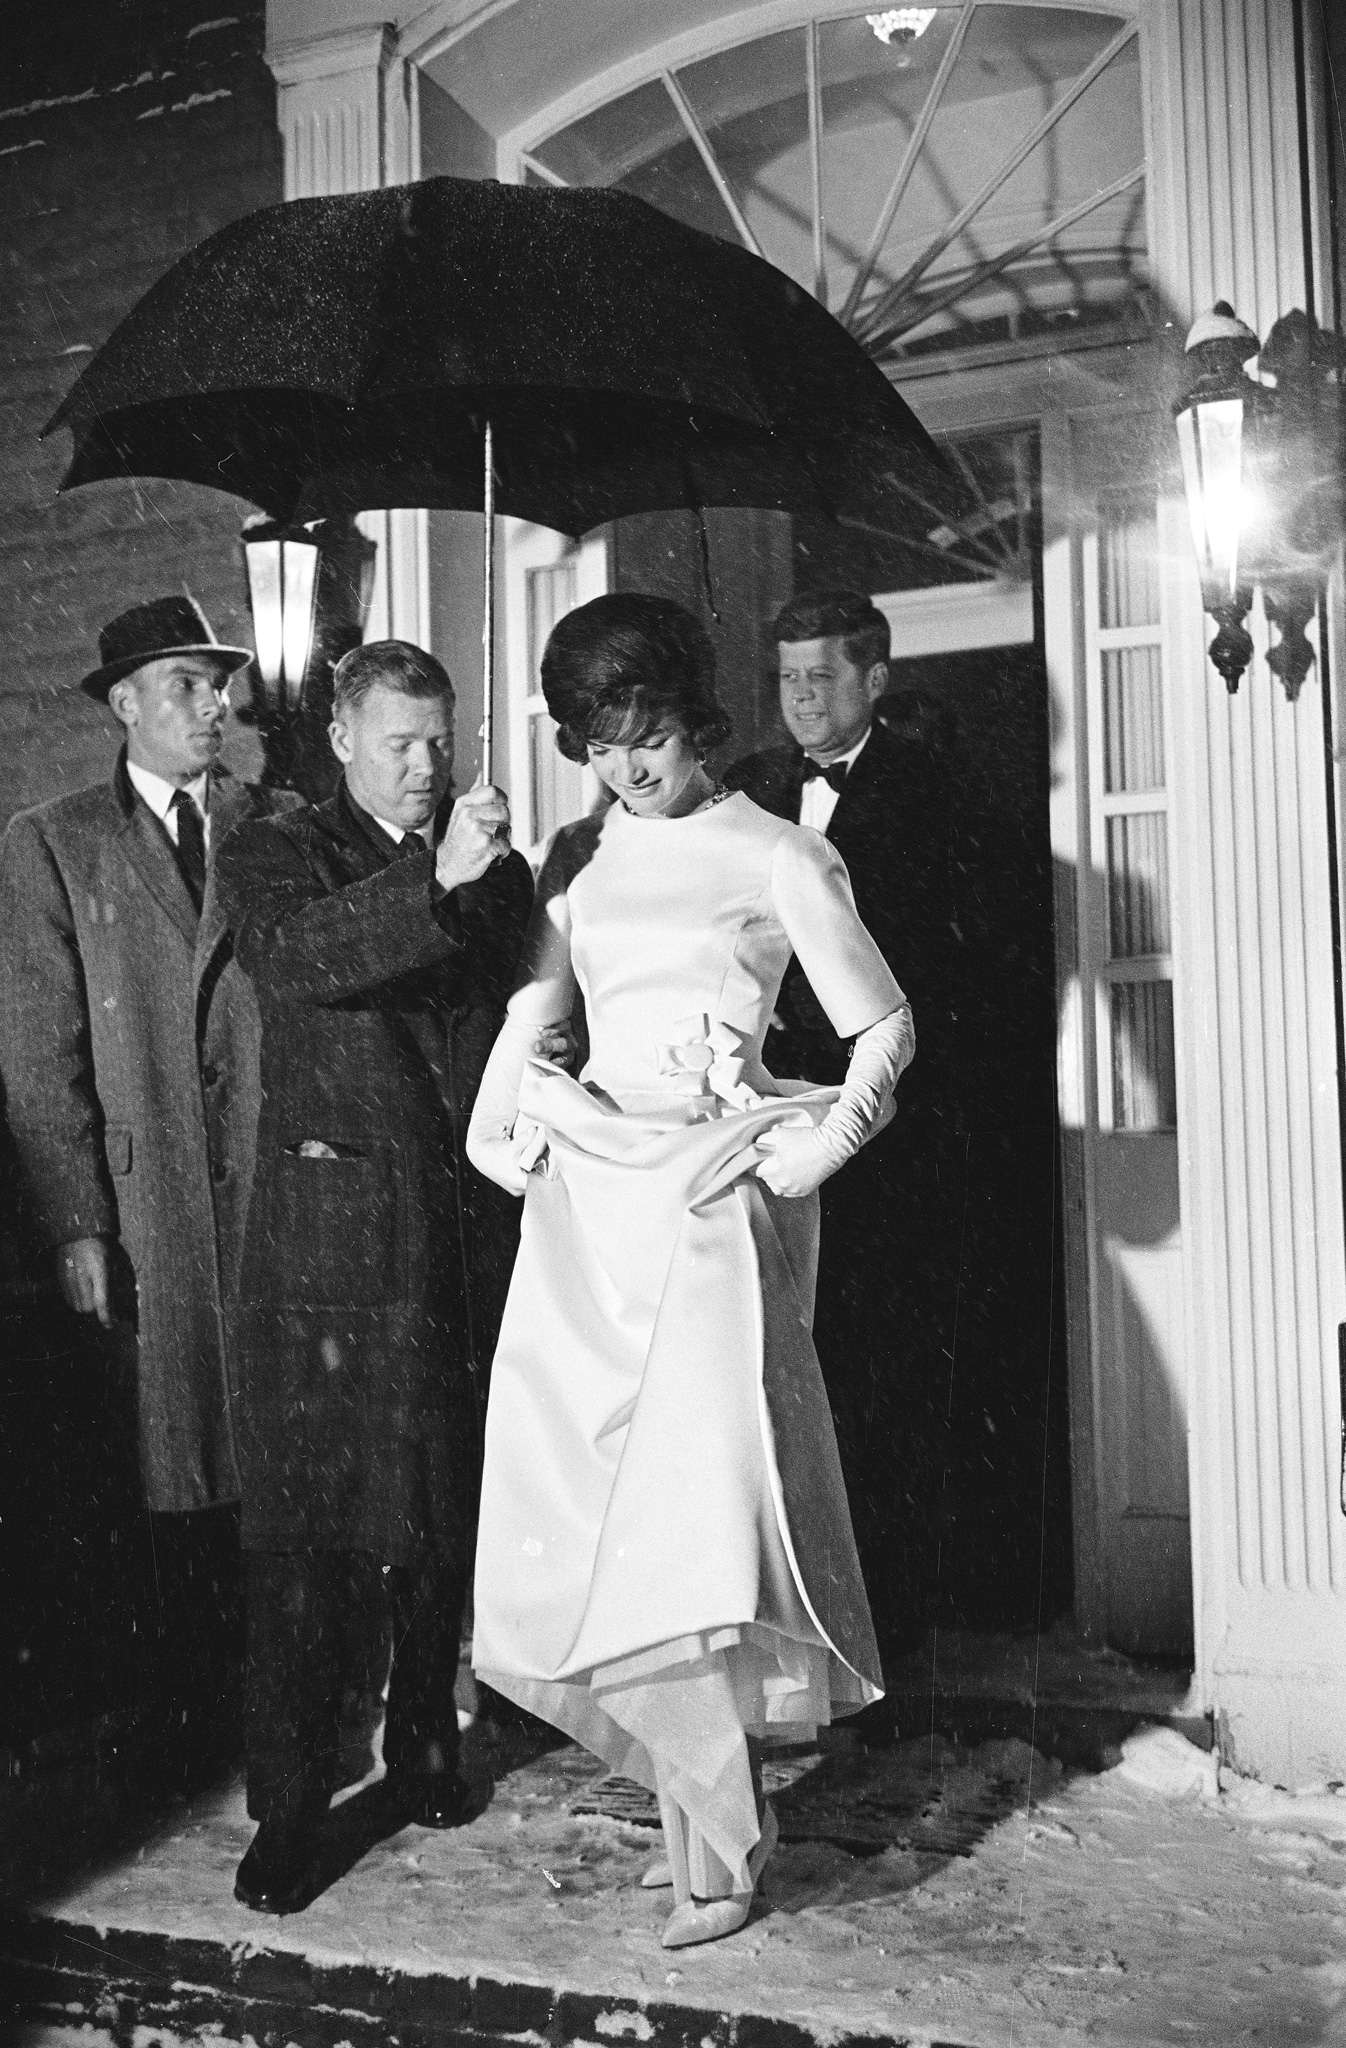 Jacqueline Kennedy and her husband John F. Kennedy, on eve of his Presidential inauguration, Jan. 19, 1961. They attended a gala hosted by Frank Sinatra at the National Guard Armory, Washington, D.C.